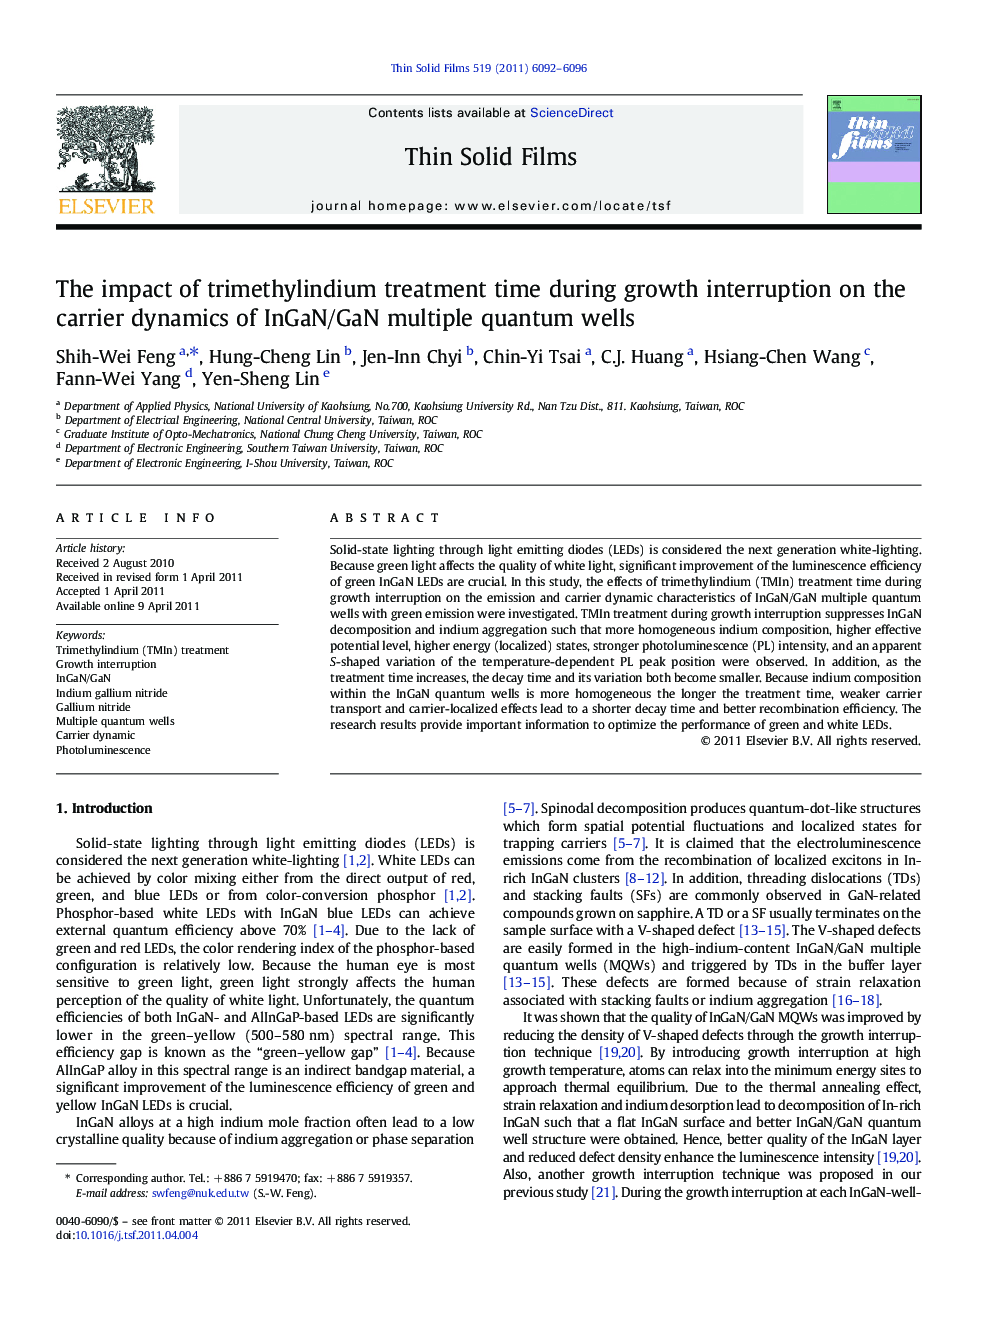 The impact of trimethylindium treatment time during growth interruption on the carrier dynamics of InGaN/GaN multiple quantum wells